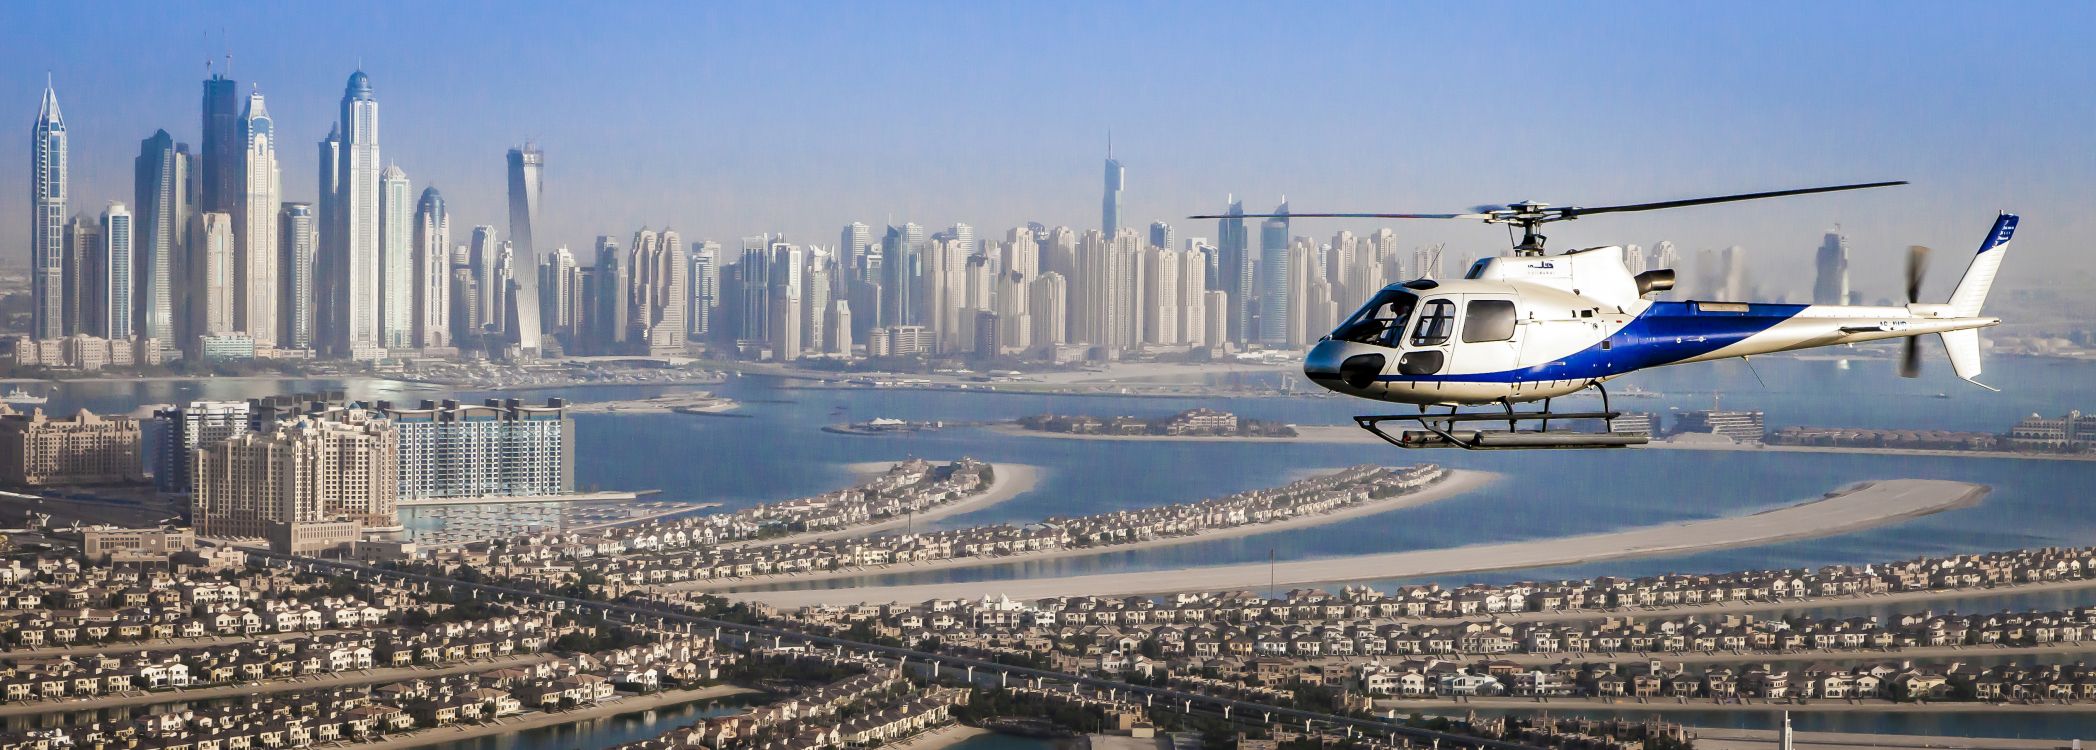 White and Blue Helicopter Flying Over City Buildings During Daytime. Wallpaper in 5060x1810 Resolution